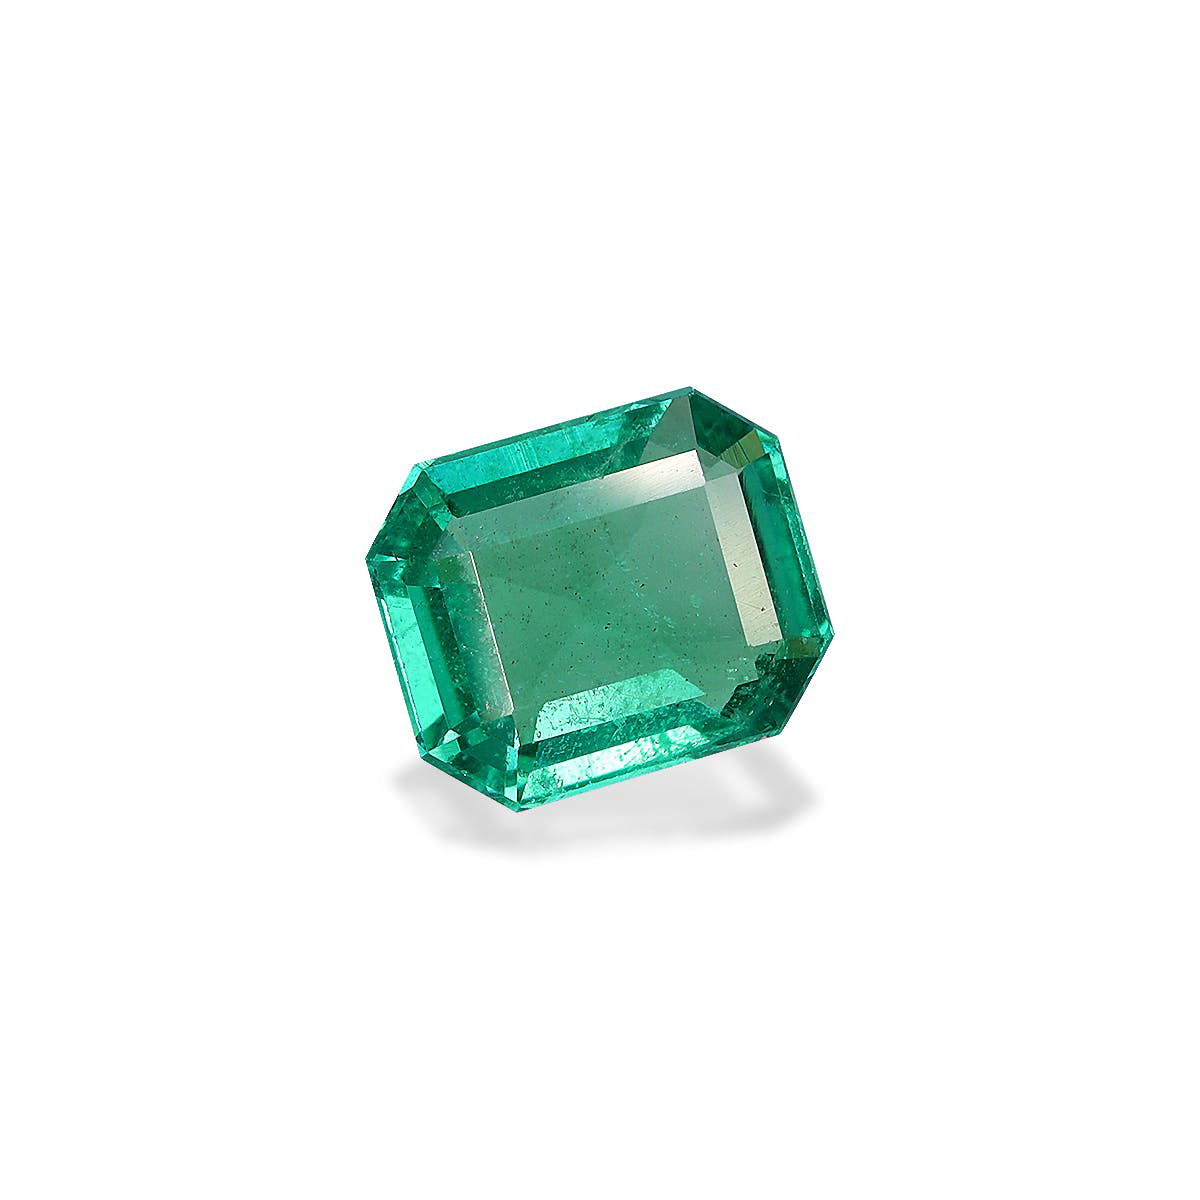 Picture of Green Zambian Emerald 2.10ct (PG0346)